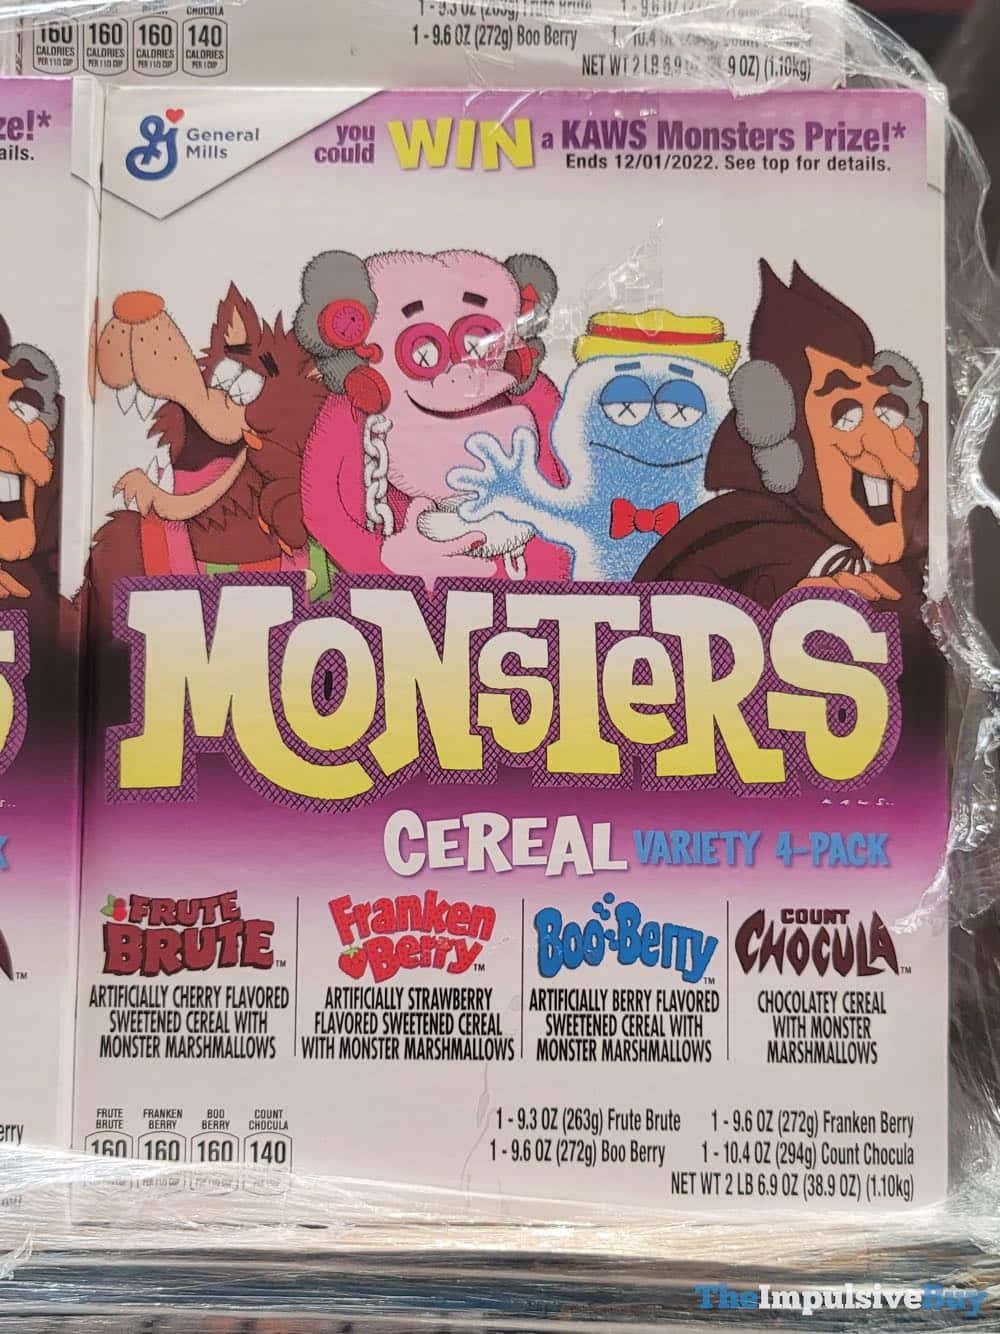 SPOTTED: Monsters Cereal x KAWS Variety 4-Pack with Frute Brute